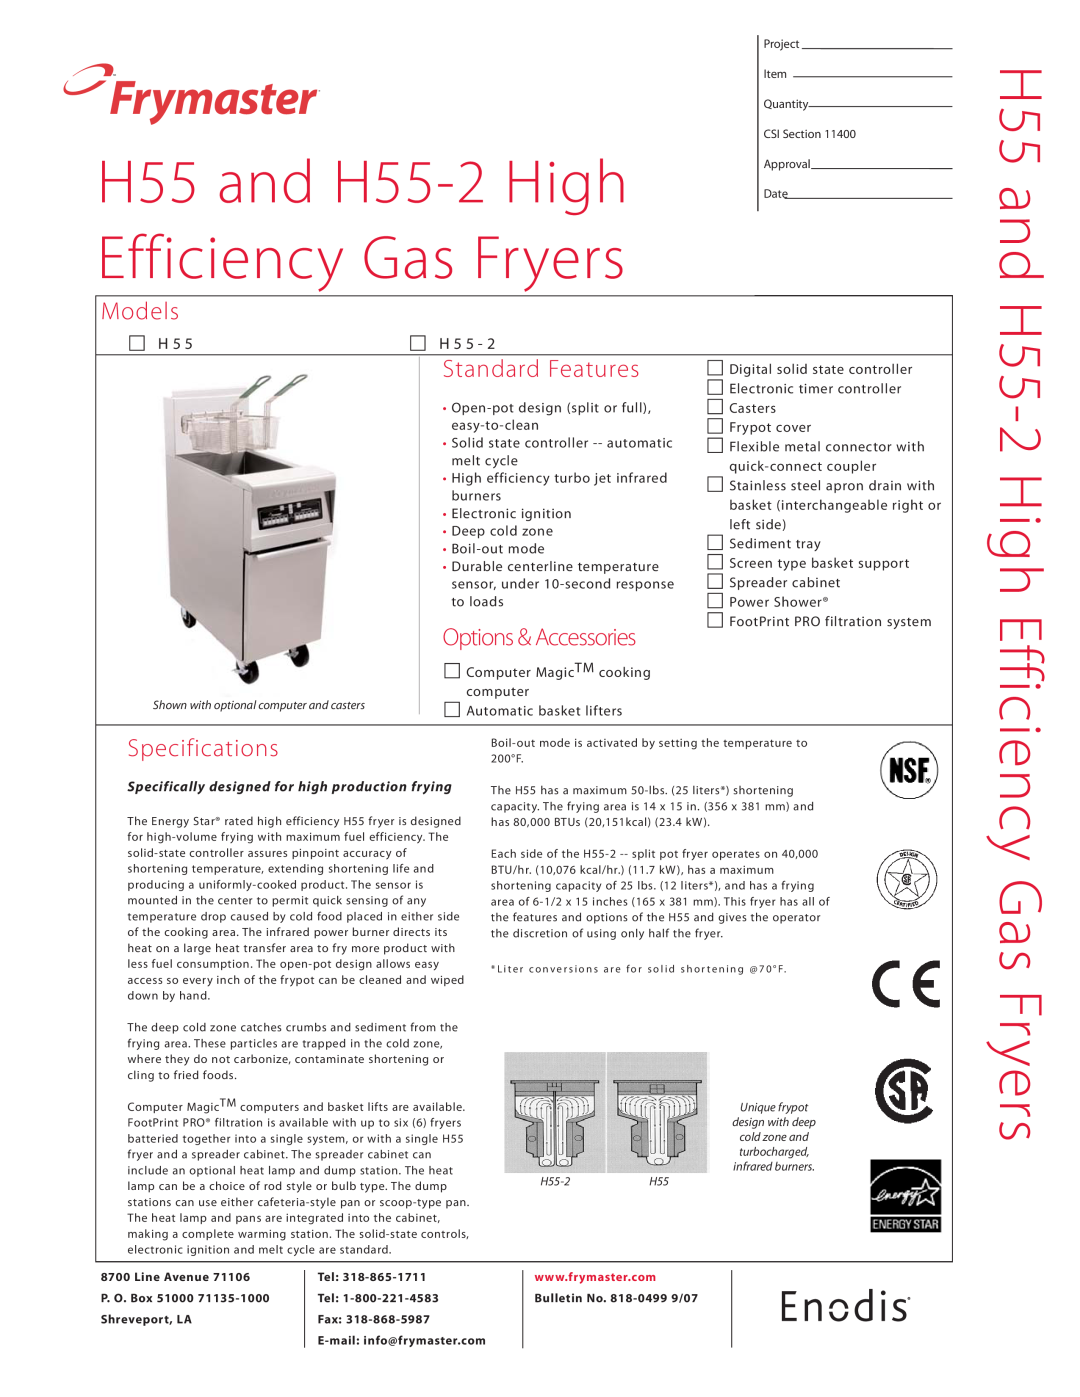 Frymaster specifications H55 and H55-2 High Efficiency Gas Fryers, Frymaster, Models, Specifications, H 5 